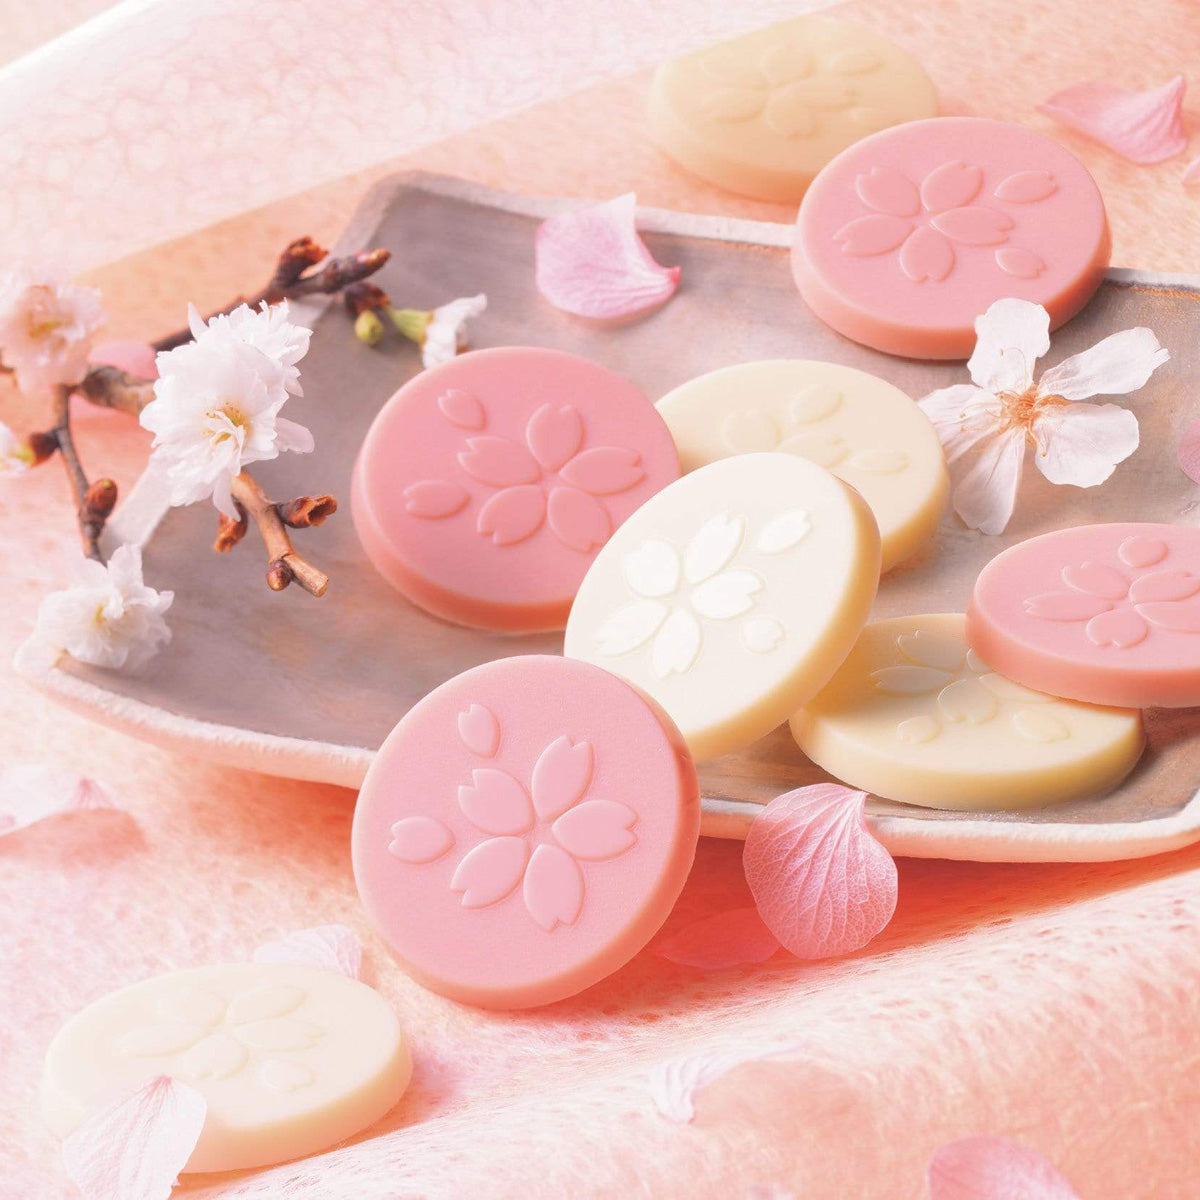 ROYCE' Chocolate - Sakuraberry & Sakurawhite Chocolate - Image shows pink and white chocolate discs with floral engravings. Accents include a gray plate, white flowers, pink petals, and brown twigs. Background is in pink color.